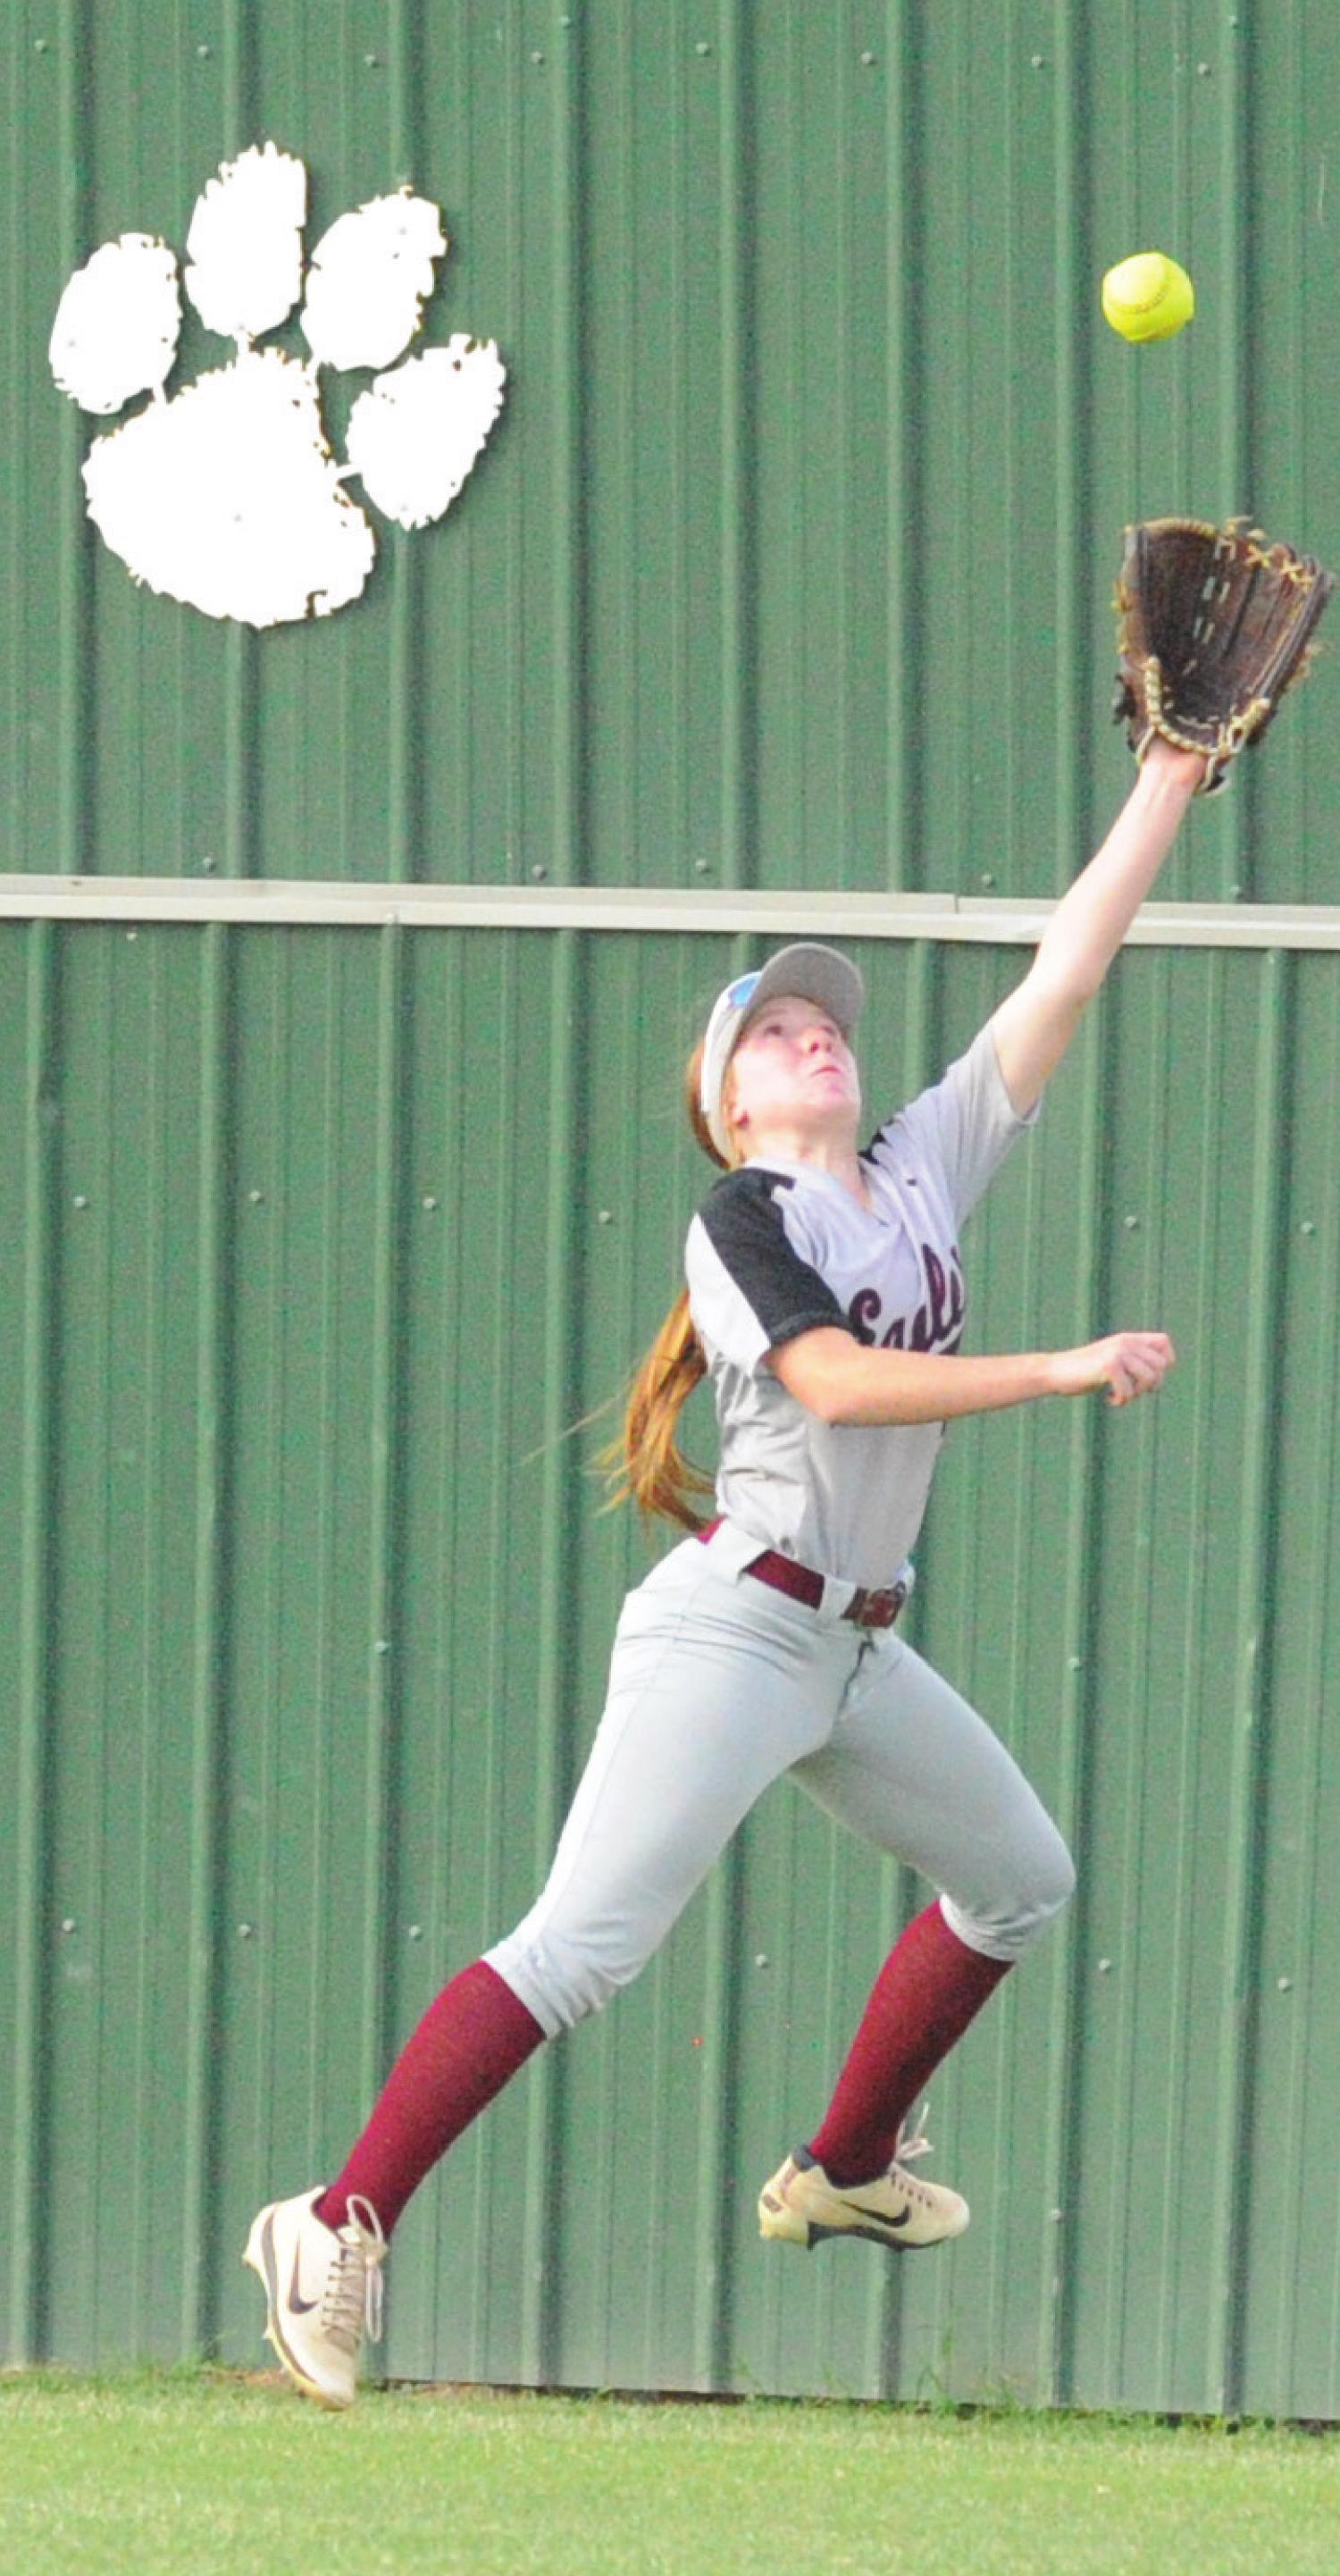 At left, Megan Mills looks up for the ball in center field in Tuesday’s game at Tuttle. Josh Burton/WDN